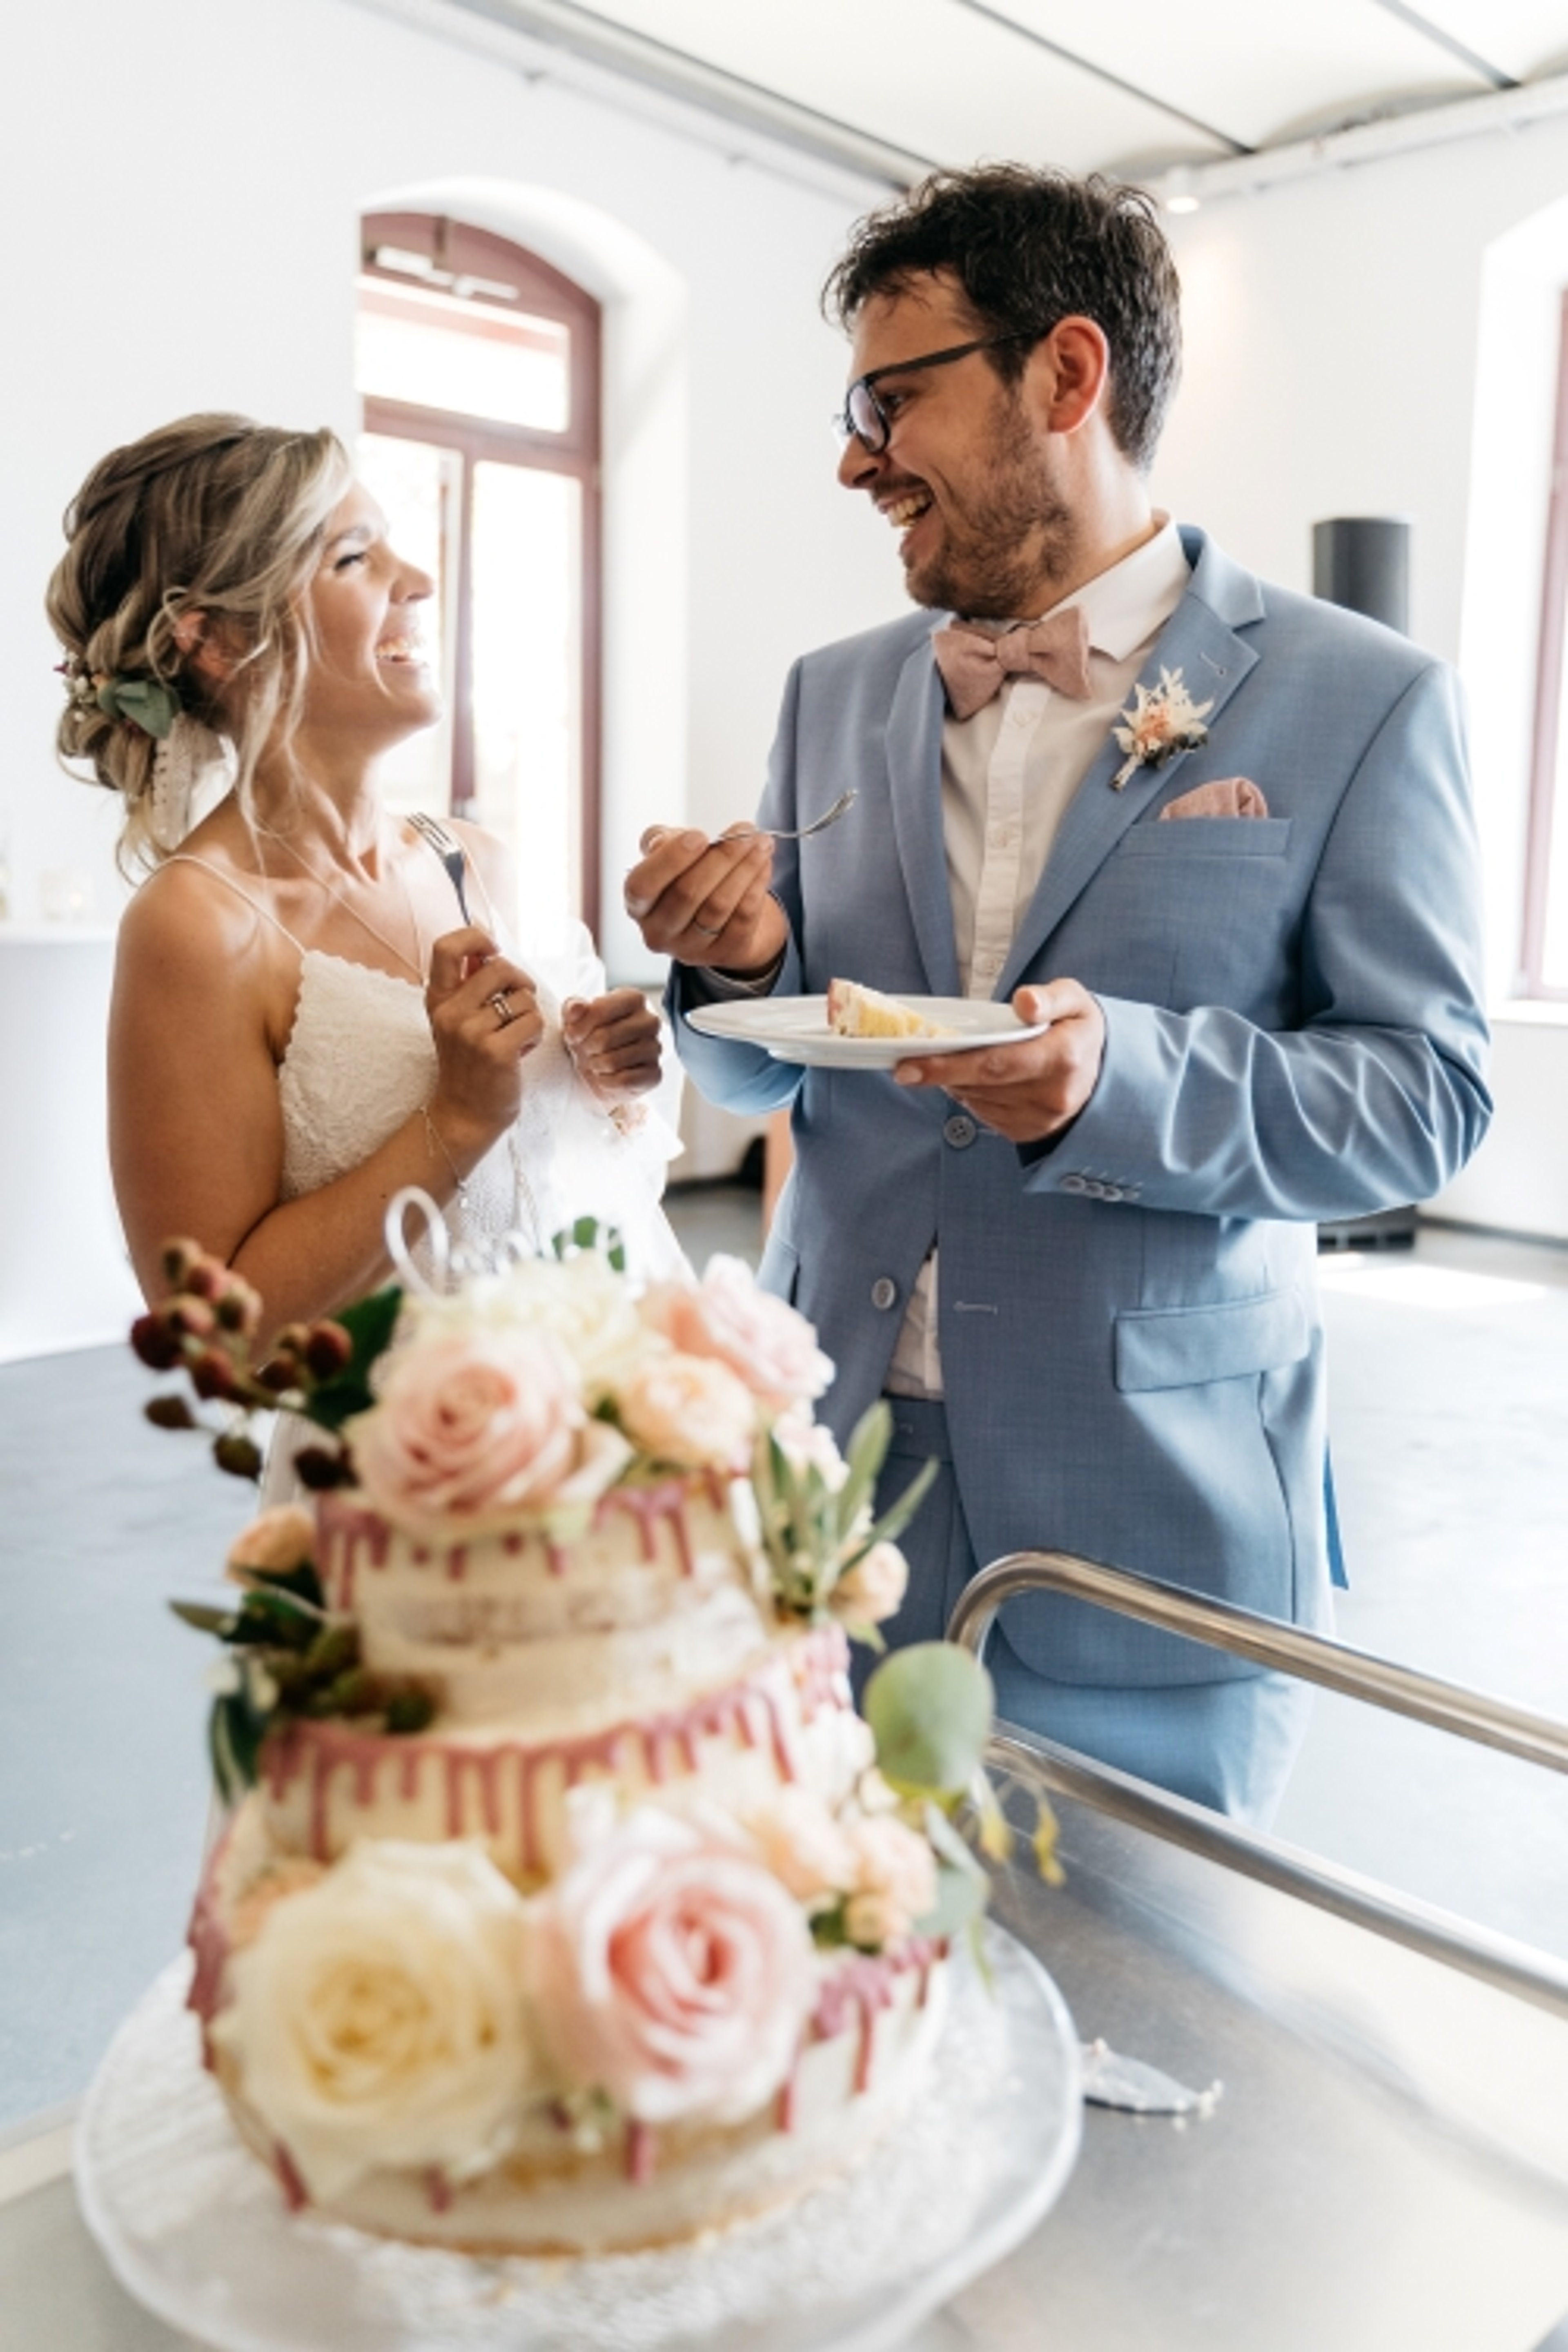 Bride and groom looking at each other in front of wedding cake with flowers